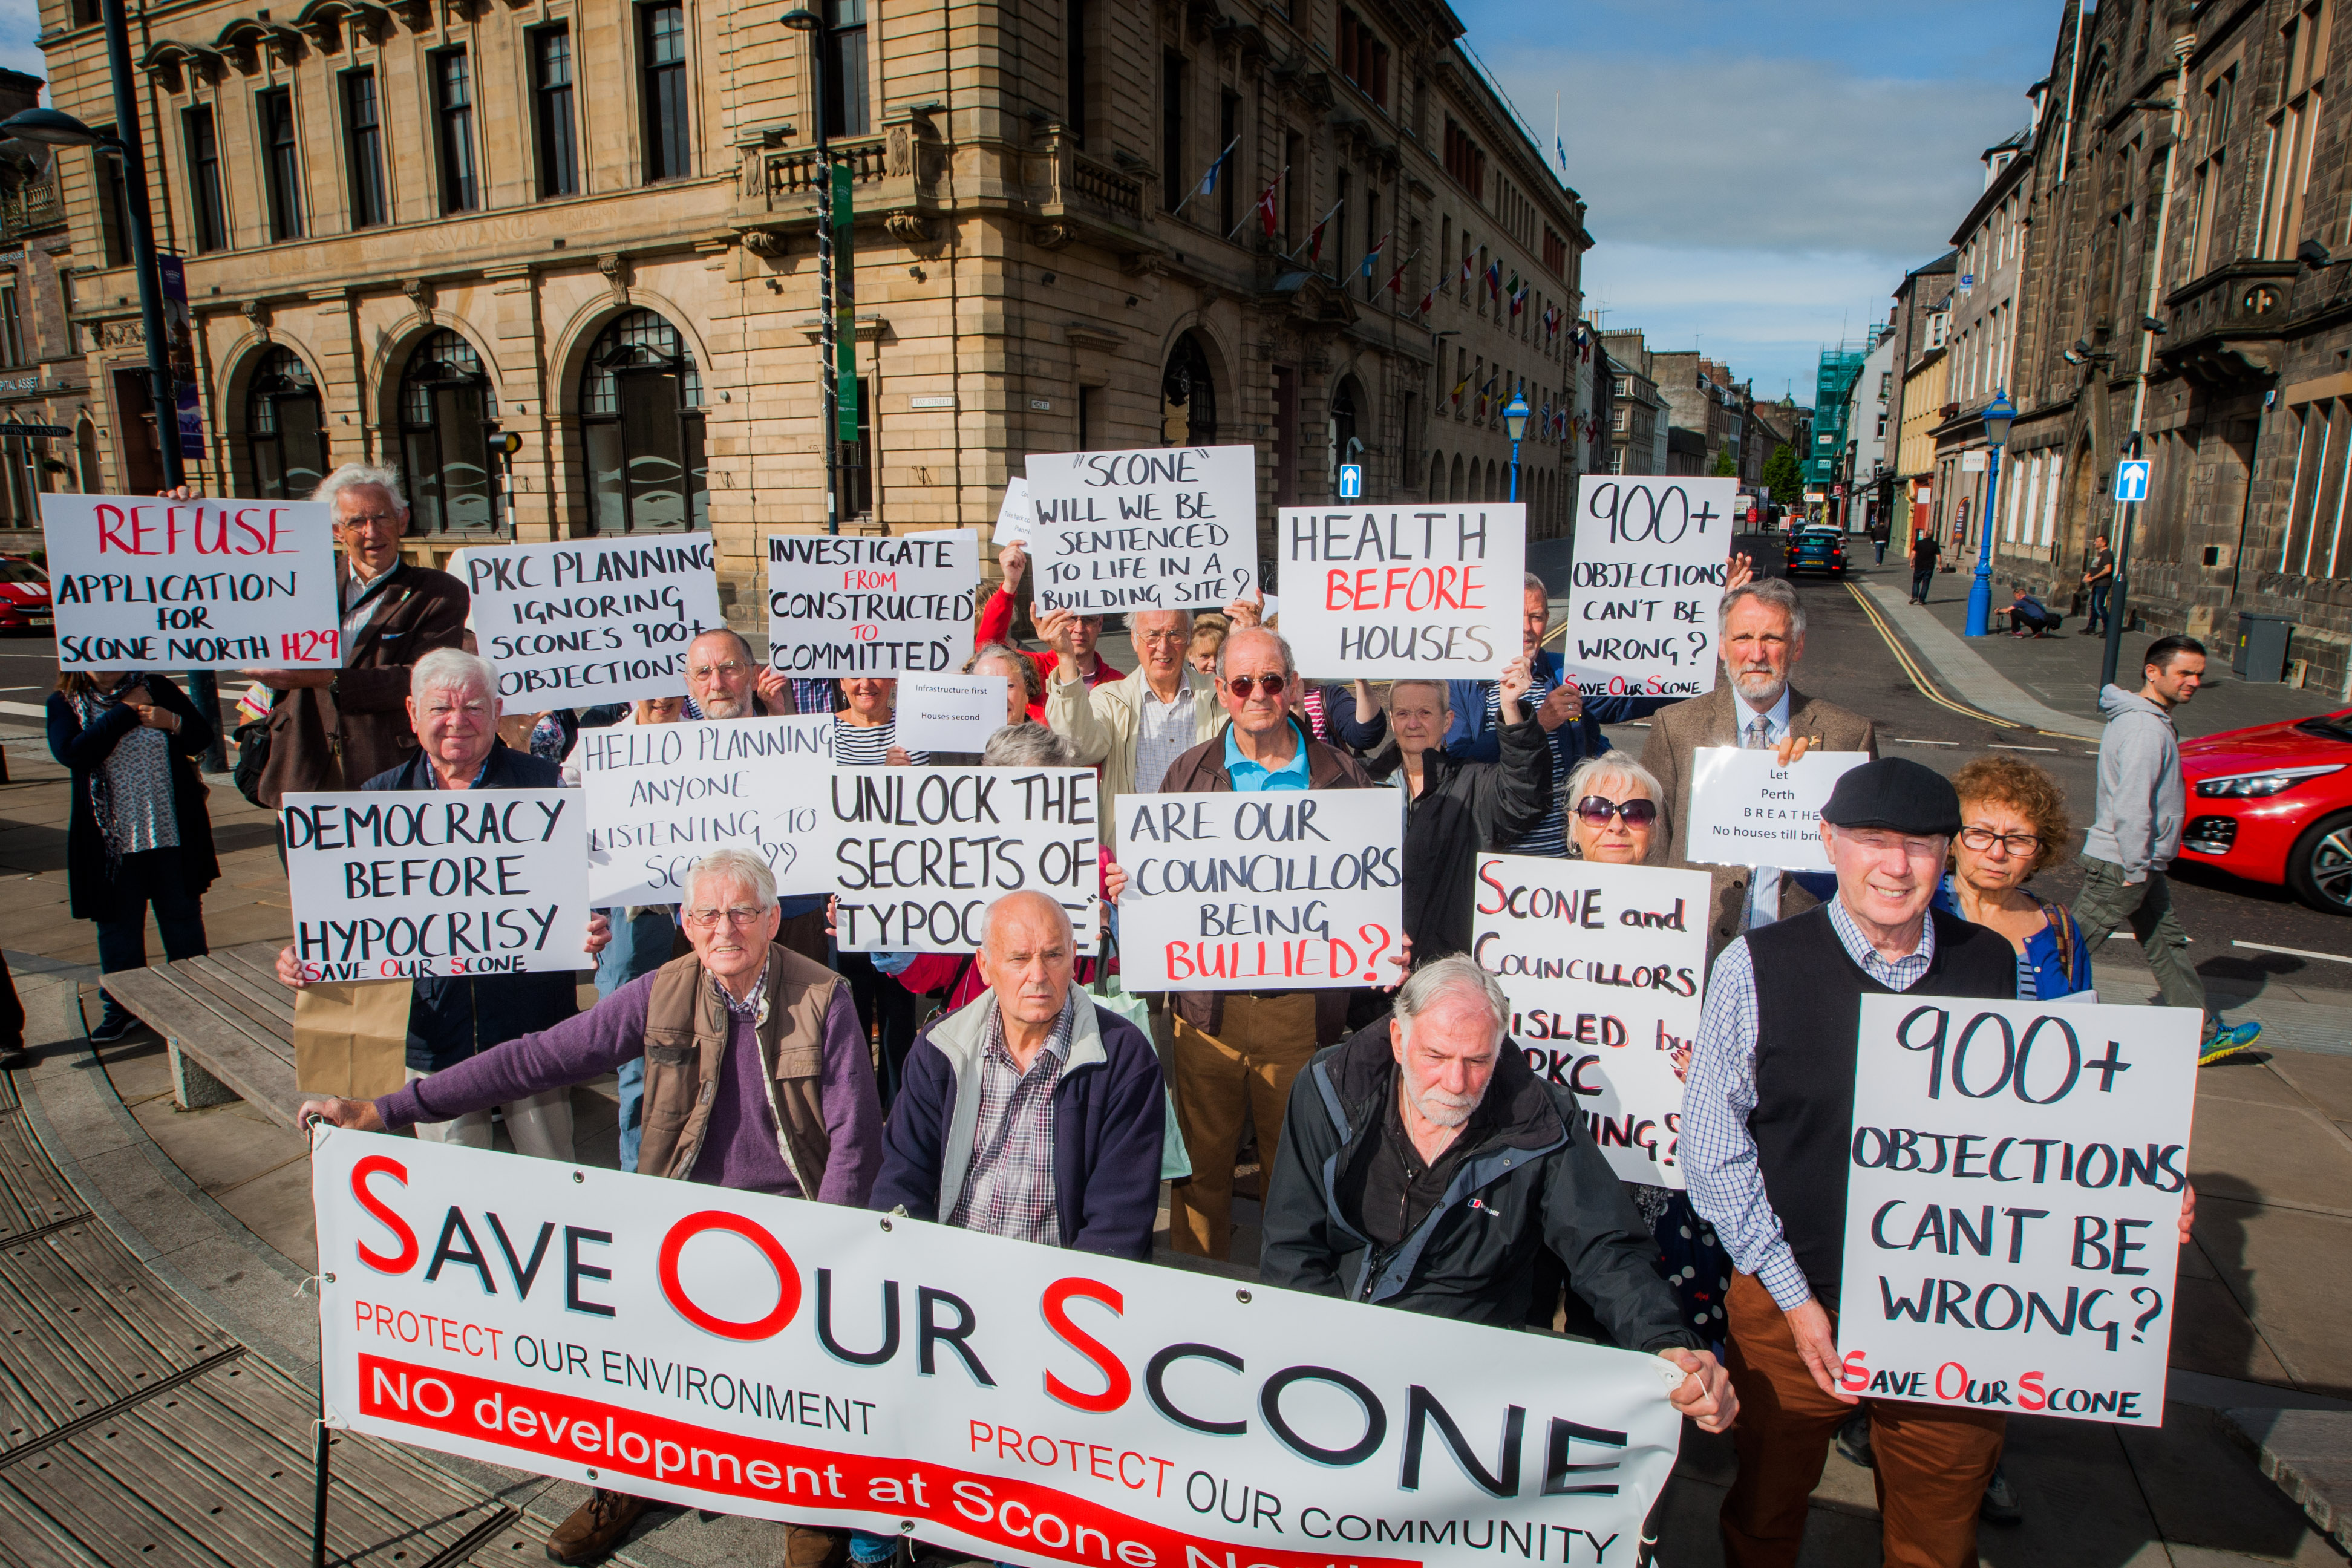 Protests against the original 700-home masterplan for Scone North